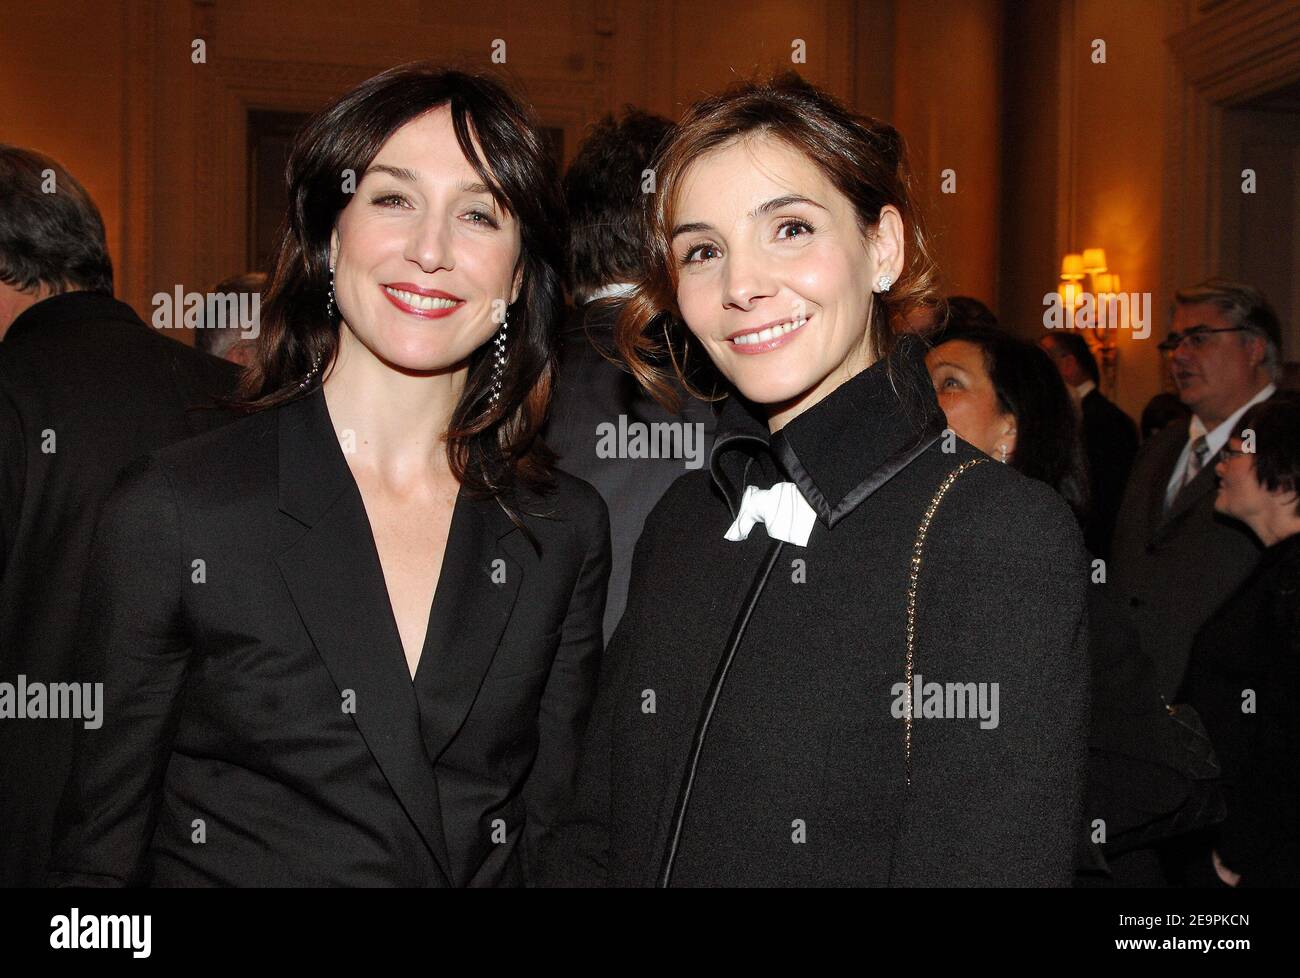 Elsa Zylberstein and Princess of Savoy Clotilde Courau attend the 'Dessine-moi un mouton' charity party, at the Four Season George V Hotel, in Paris, France, on December 11, 2006. The 'Dessine moi un mouton' NGO helps children and their family infected by HIV/AIDS. Photo by Christophe Guibbaud/ABACAPRESS.COM Stock Photo